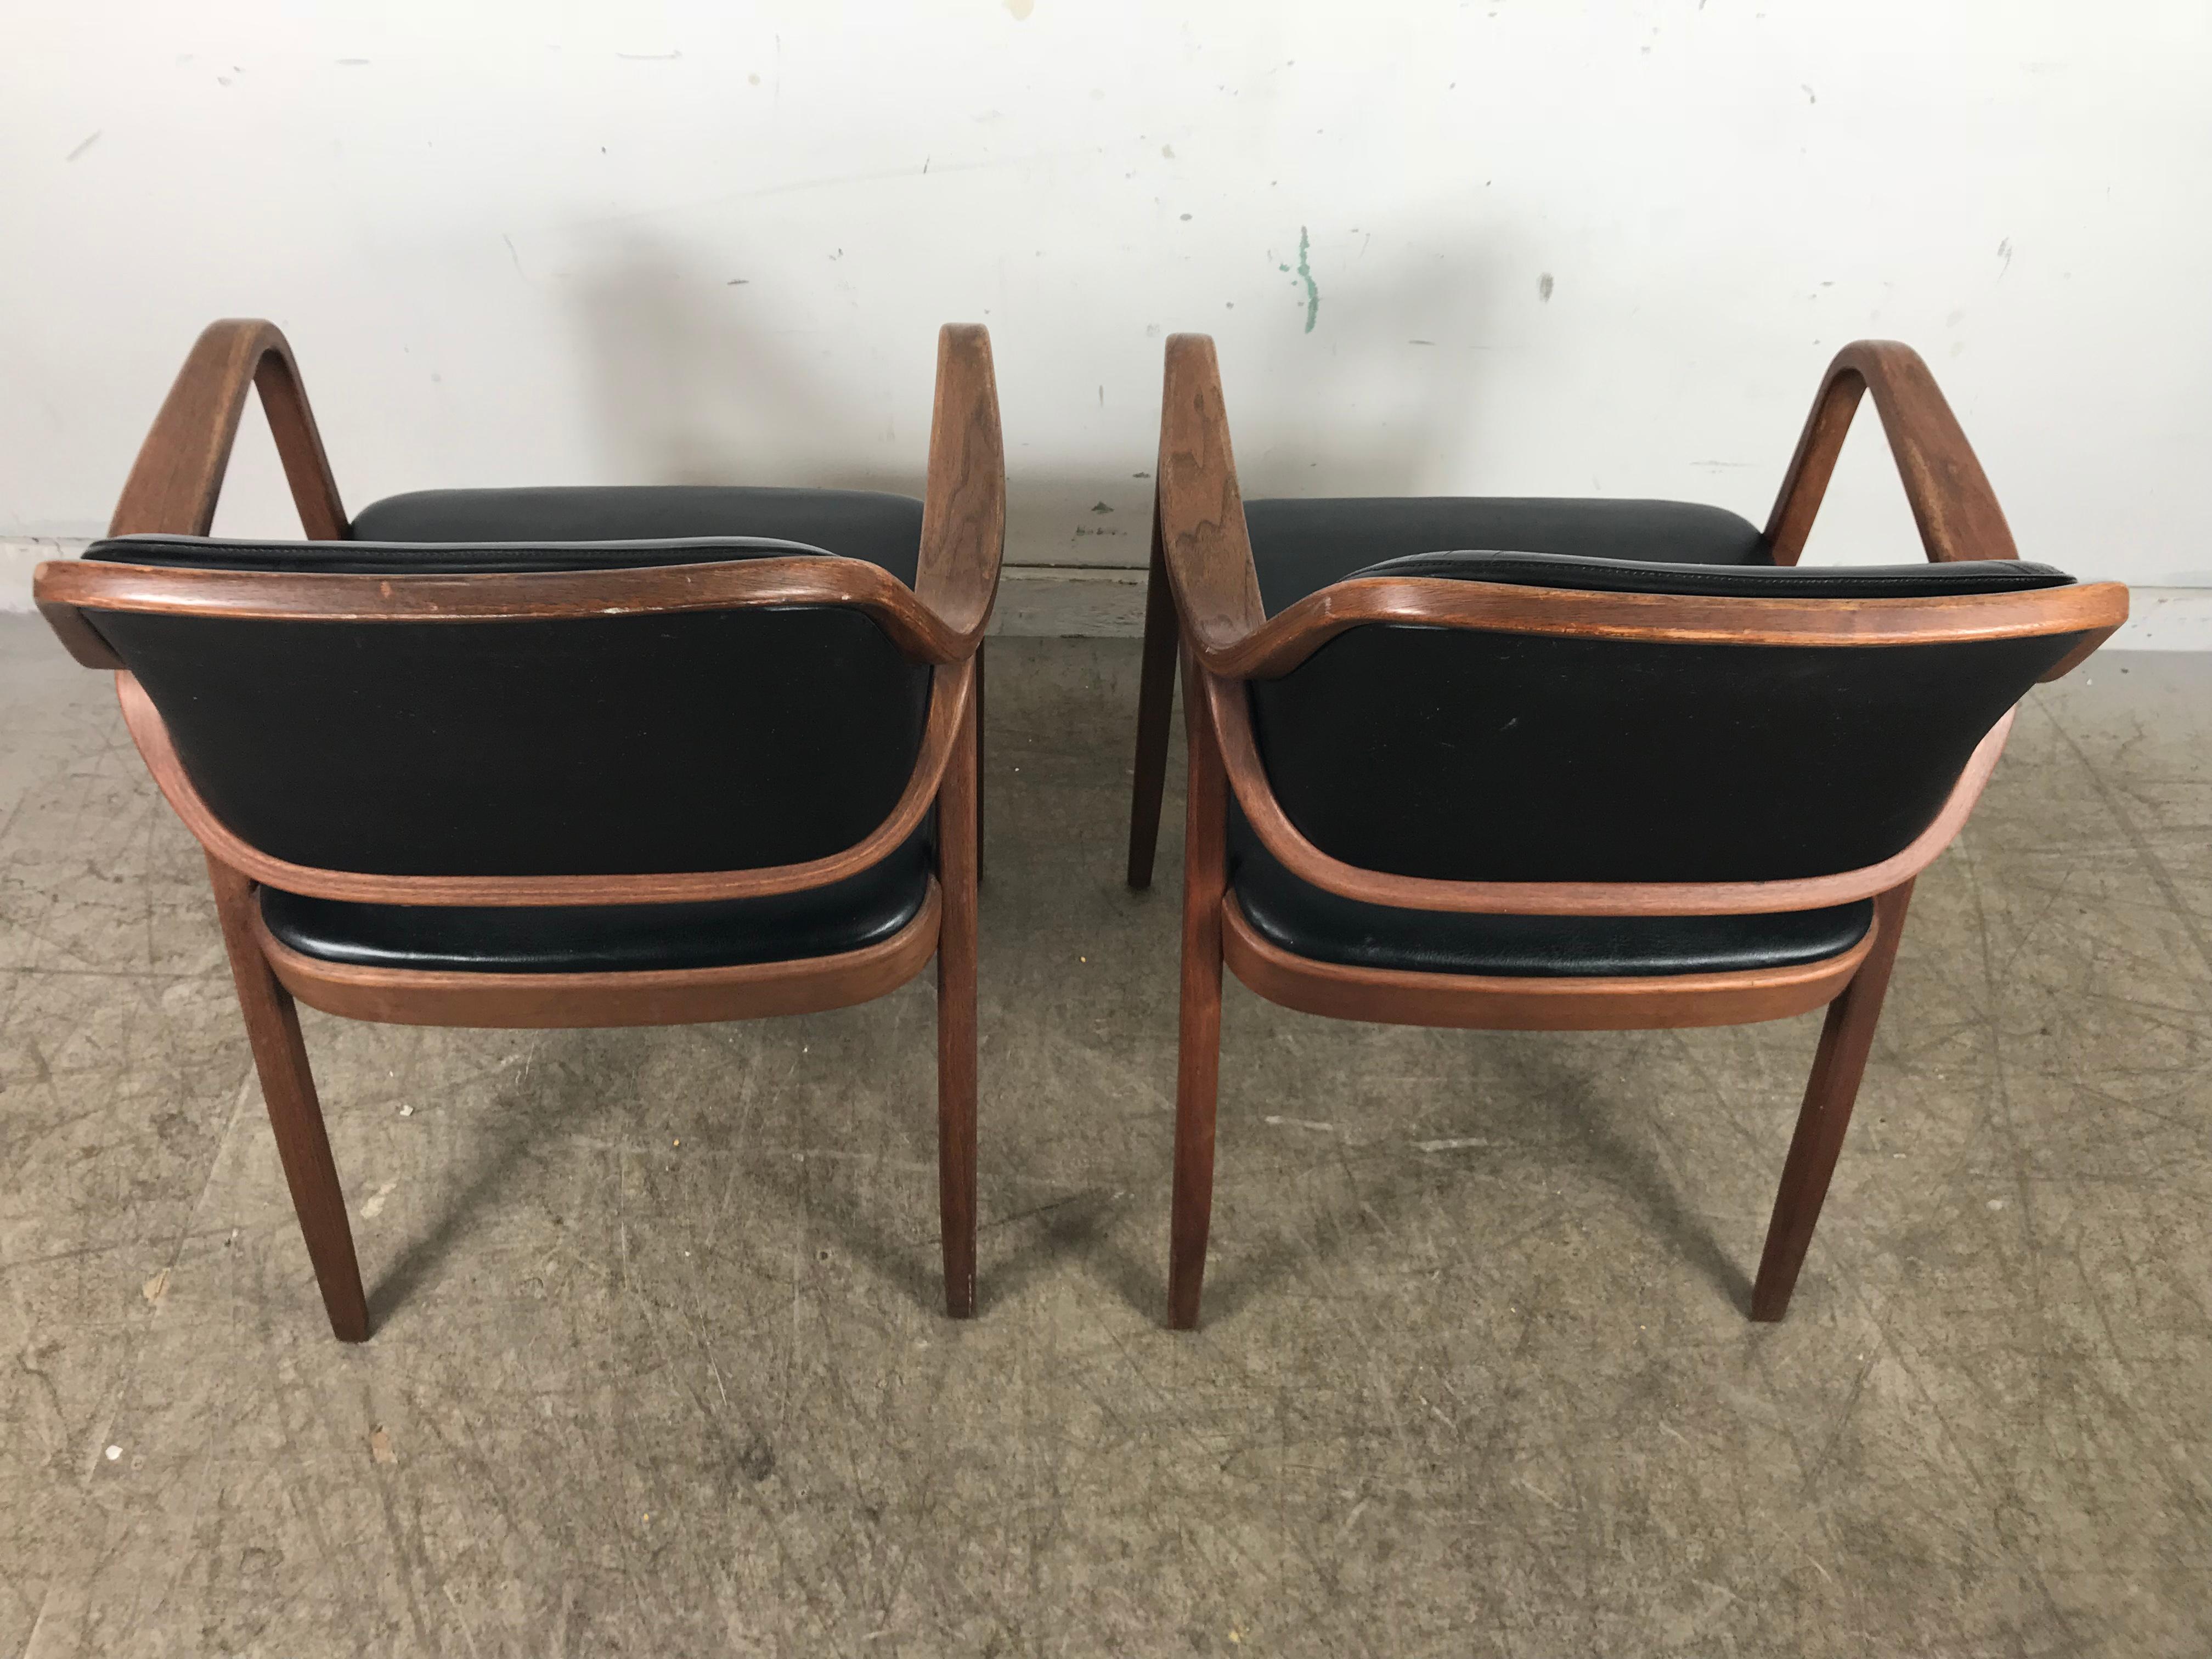 Pair of Modernist Bentwood Mahogany and Leather Chairs by Don Pettit for Knoll 1